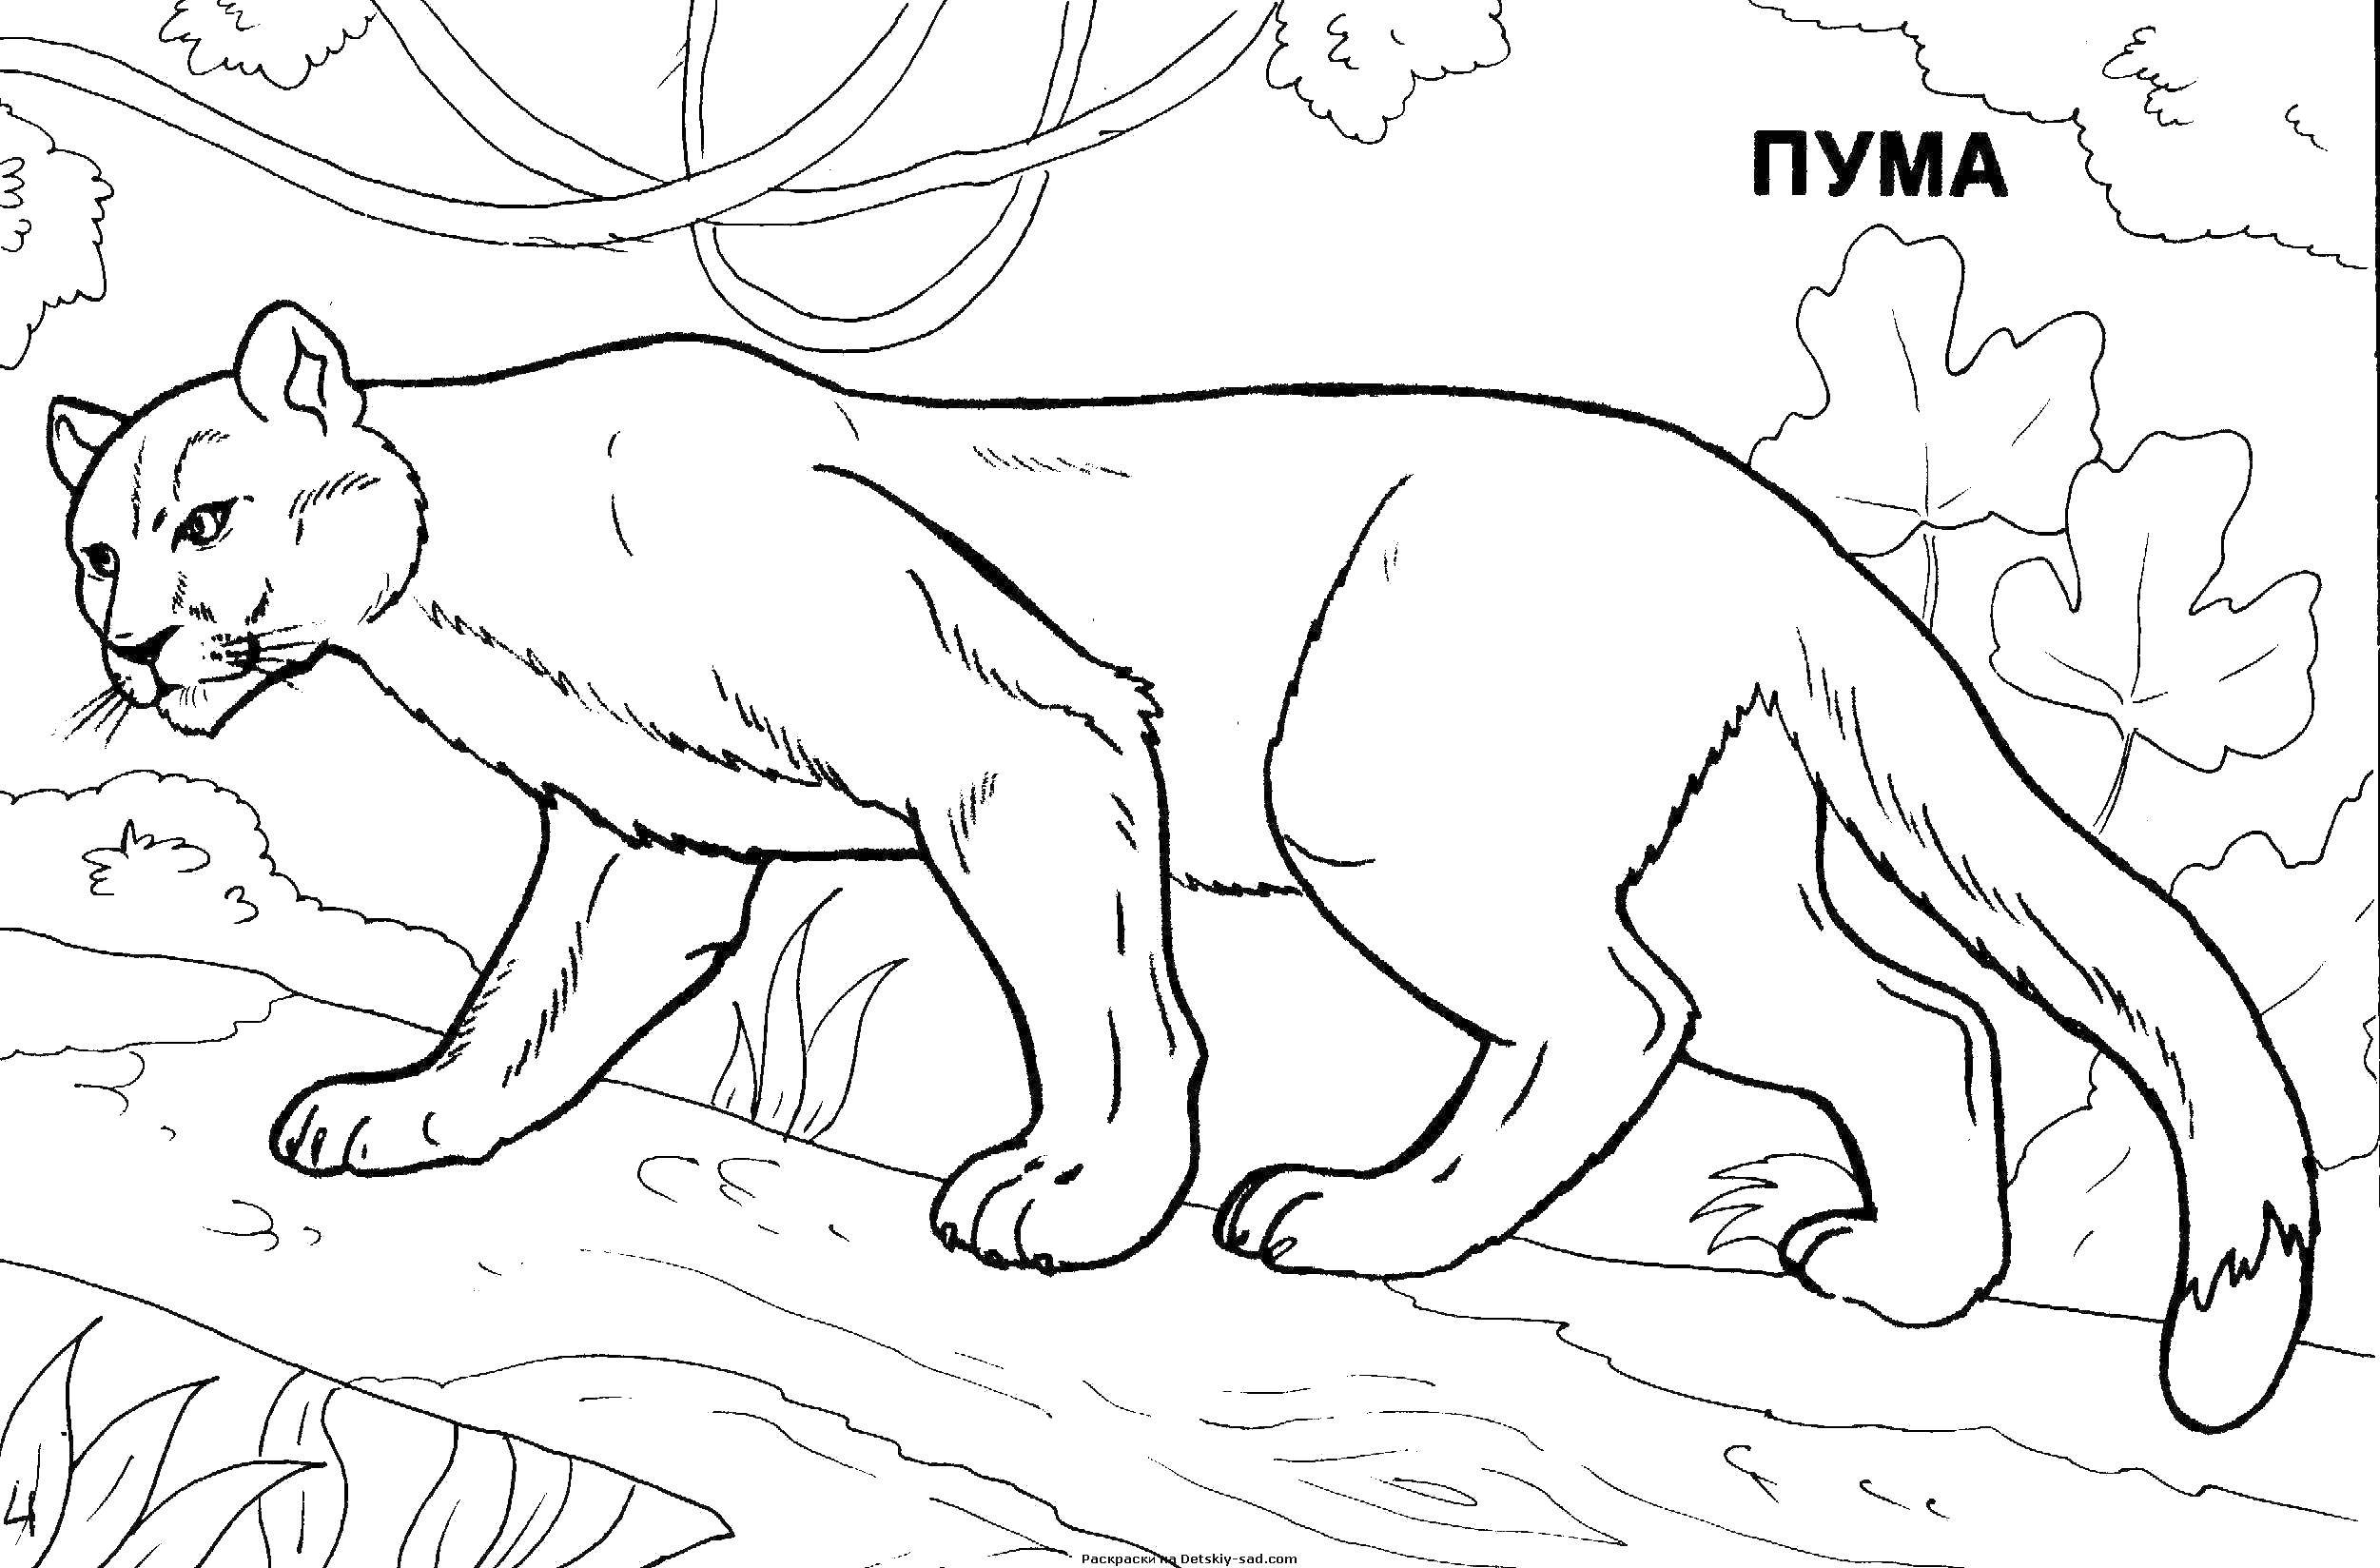 Coloring Cougar on a log. Category wild animals. Tags:  Puma, cat, log.